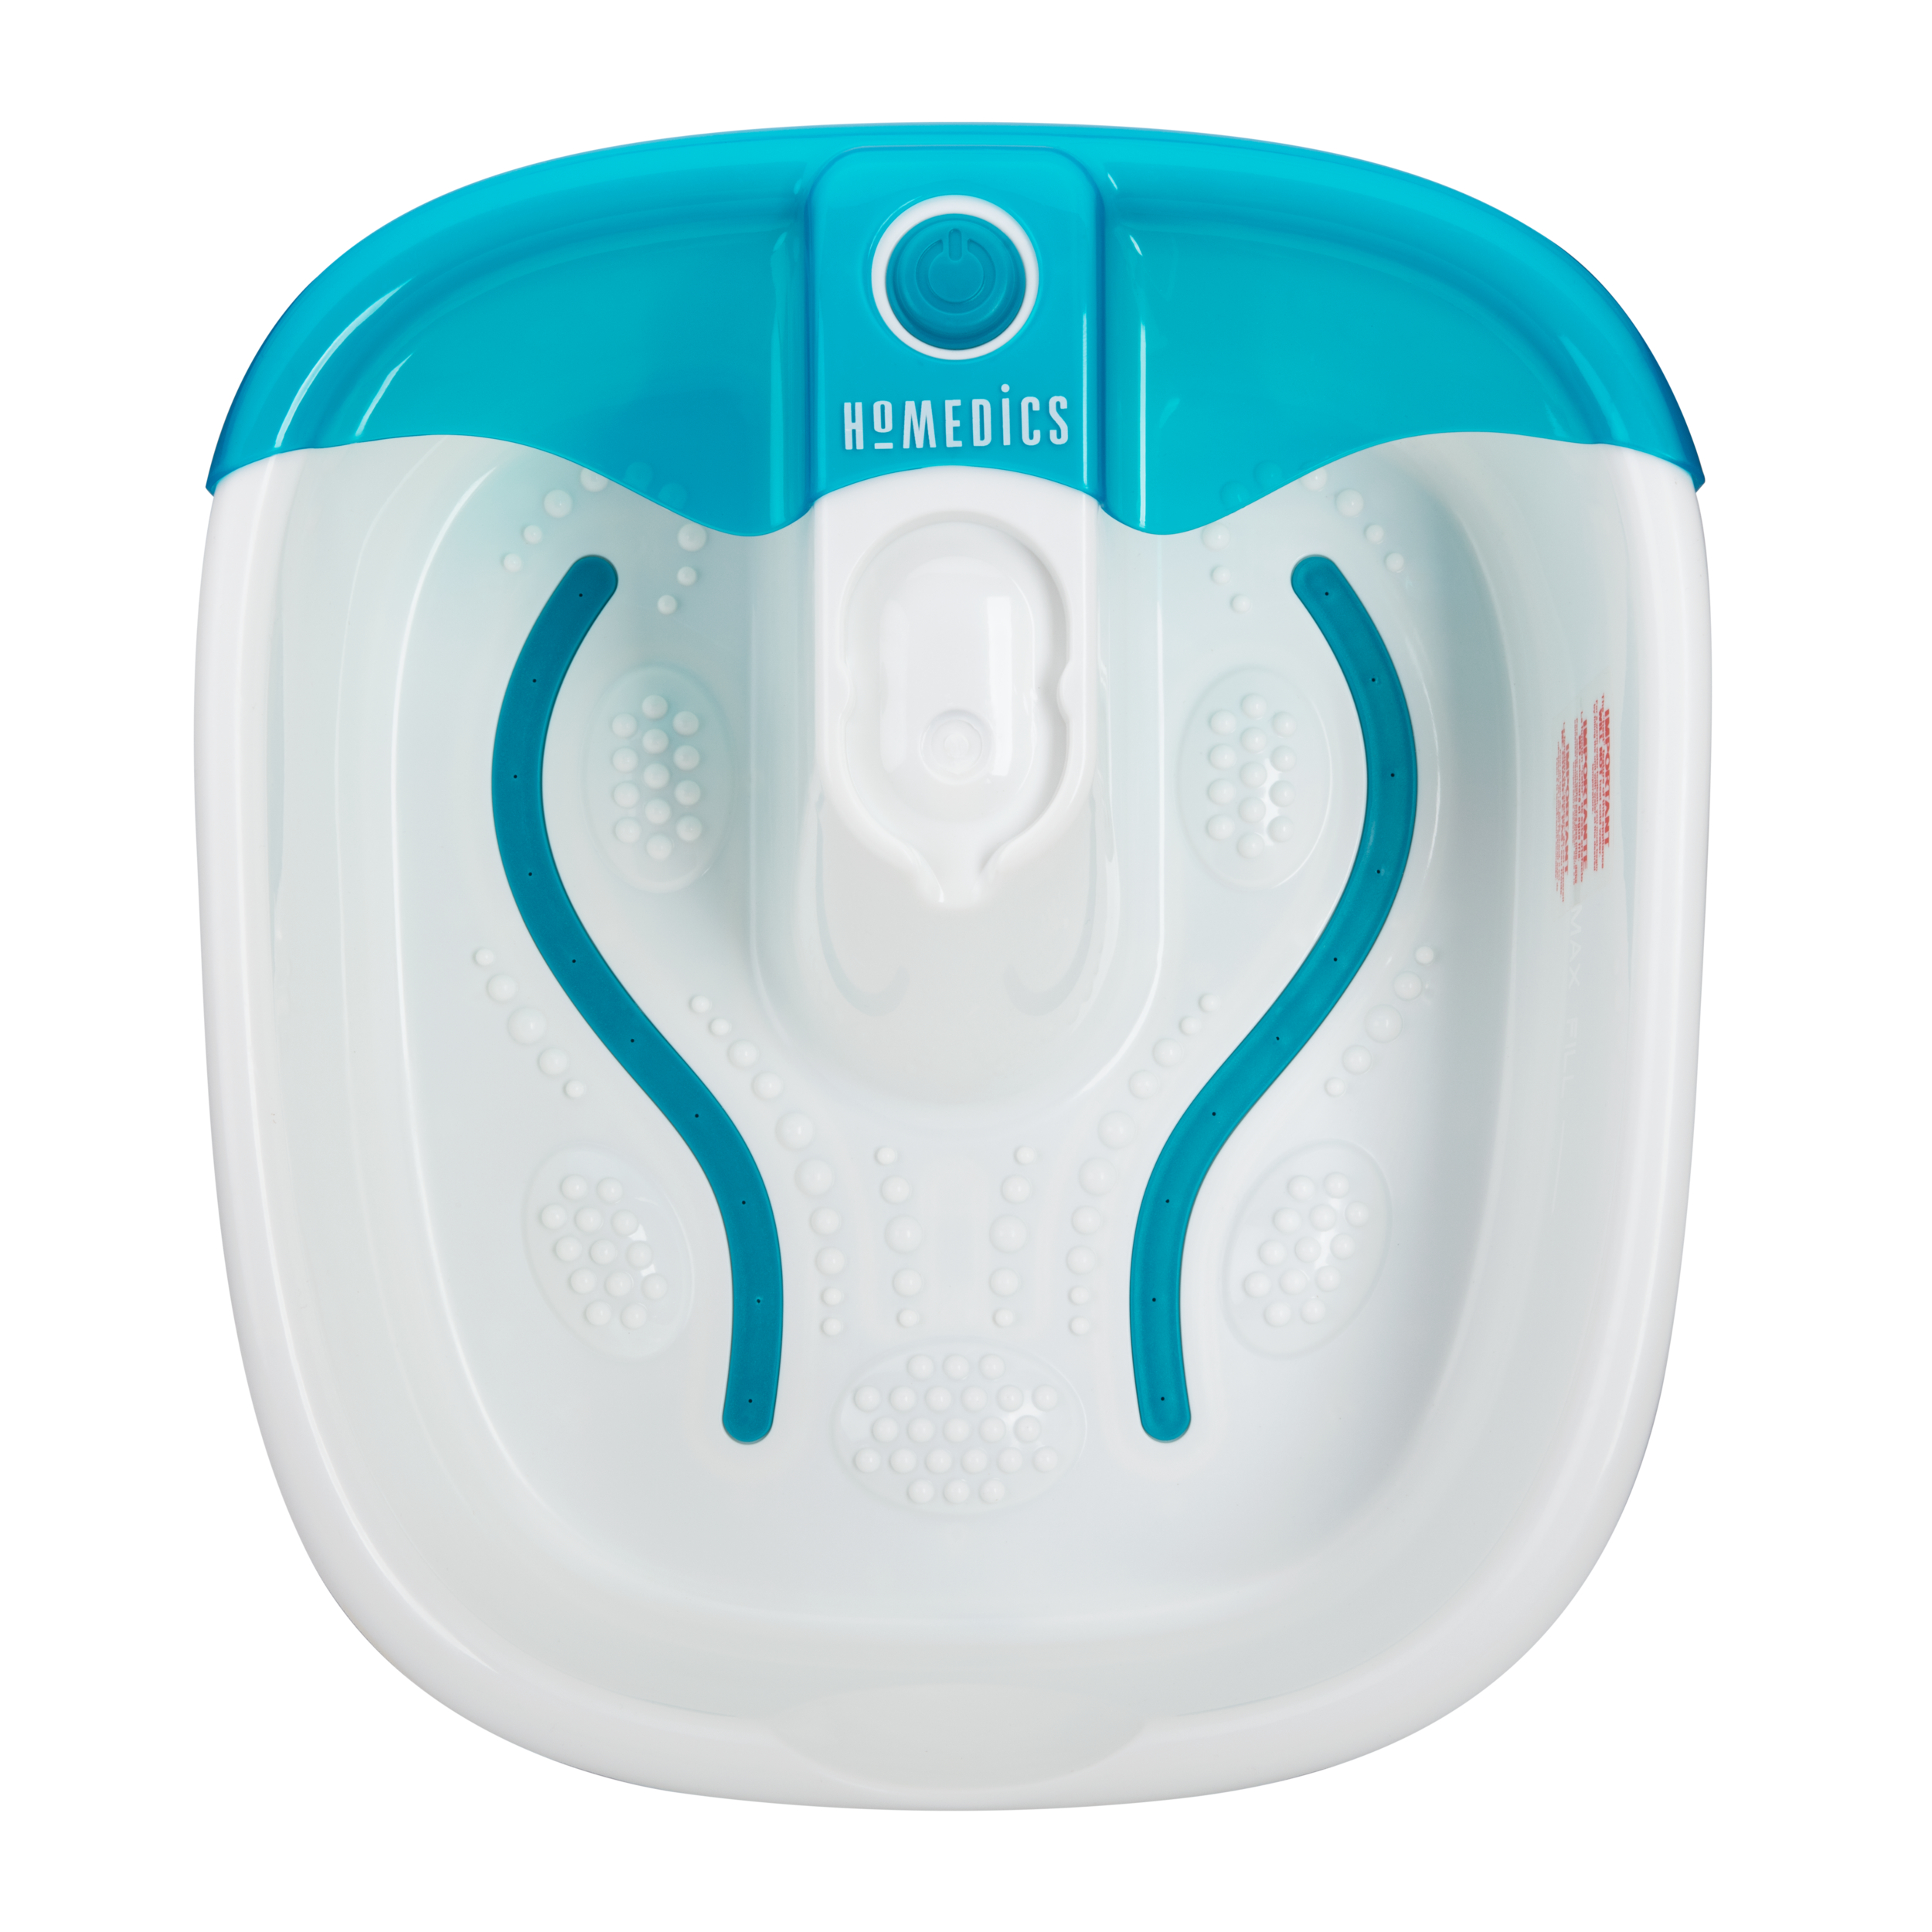 Homedics Bubble Mate Heated Foot Spa Bubble Foot Massager with Raised Massage nodes and Removable Pumice Stone - image 5 of 19